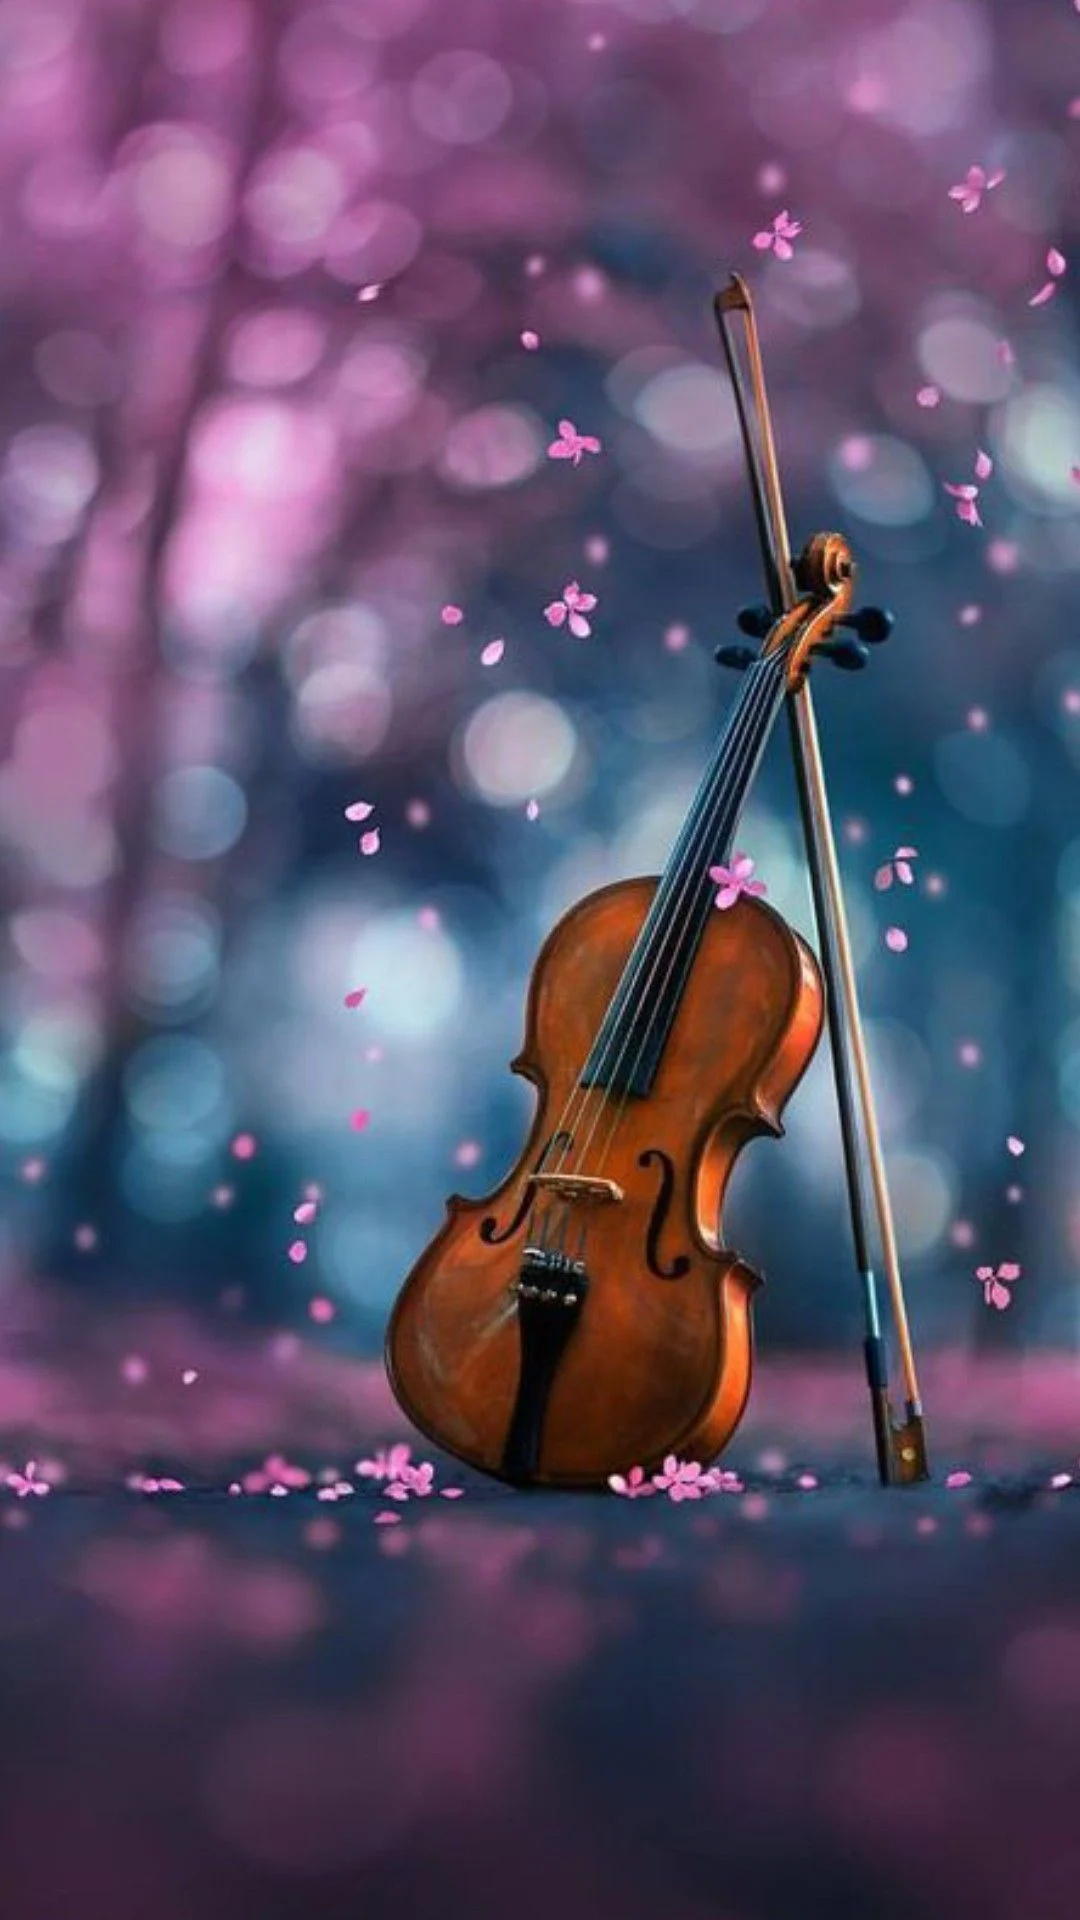 Violoncello: Art, Fiddle And Flowers, Romantic Garden Music. 1080x1920 Full HD Background.